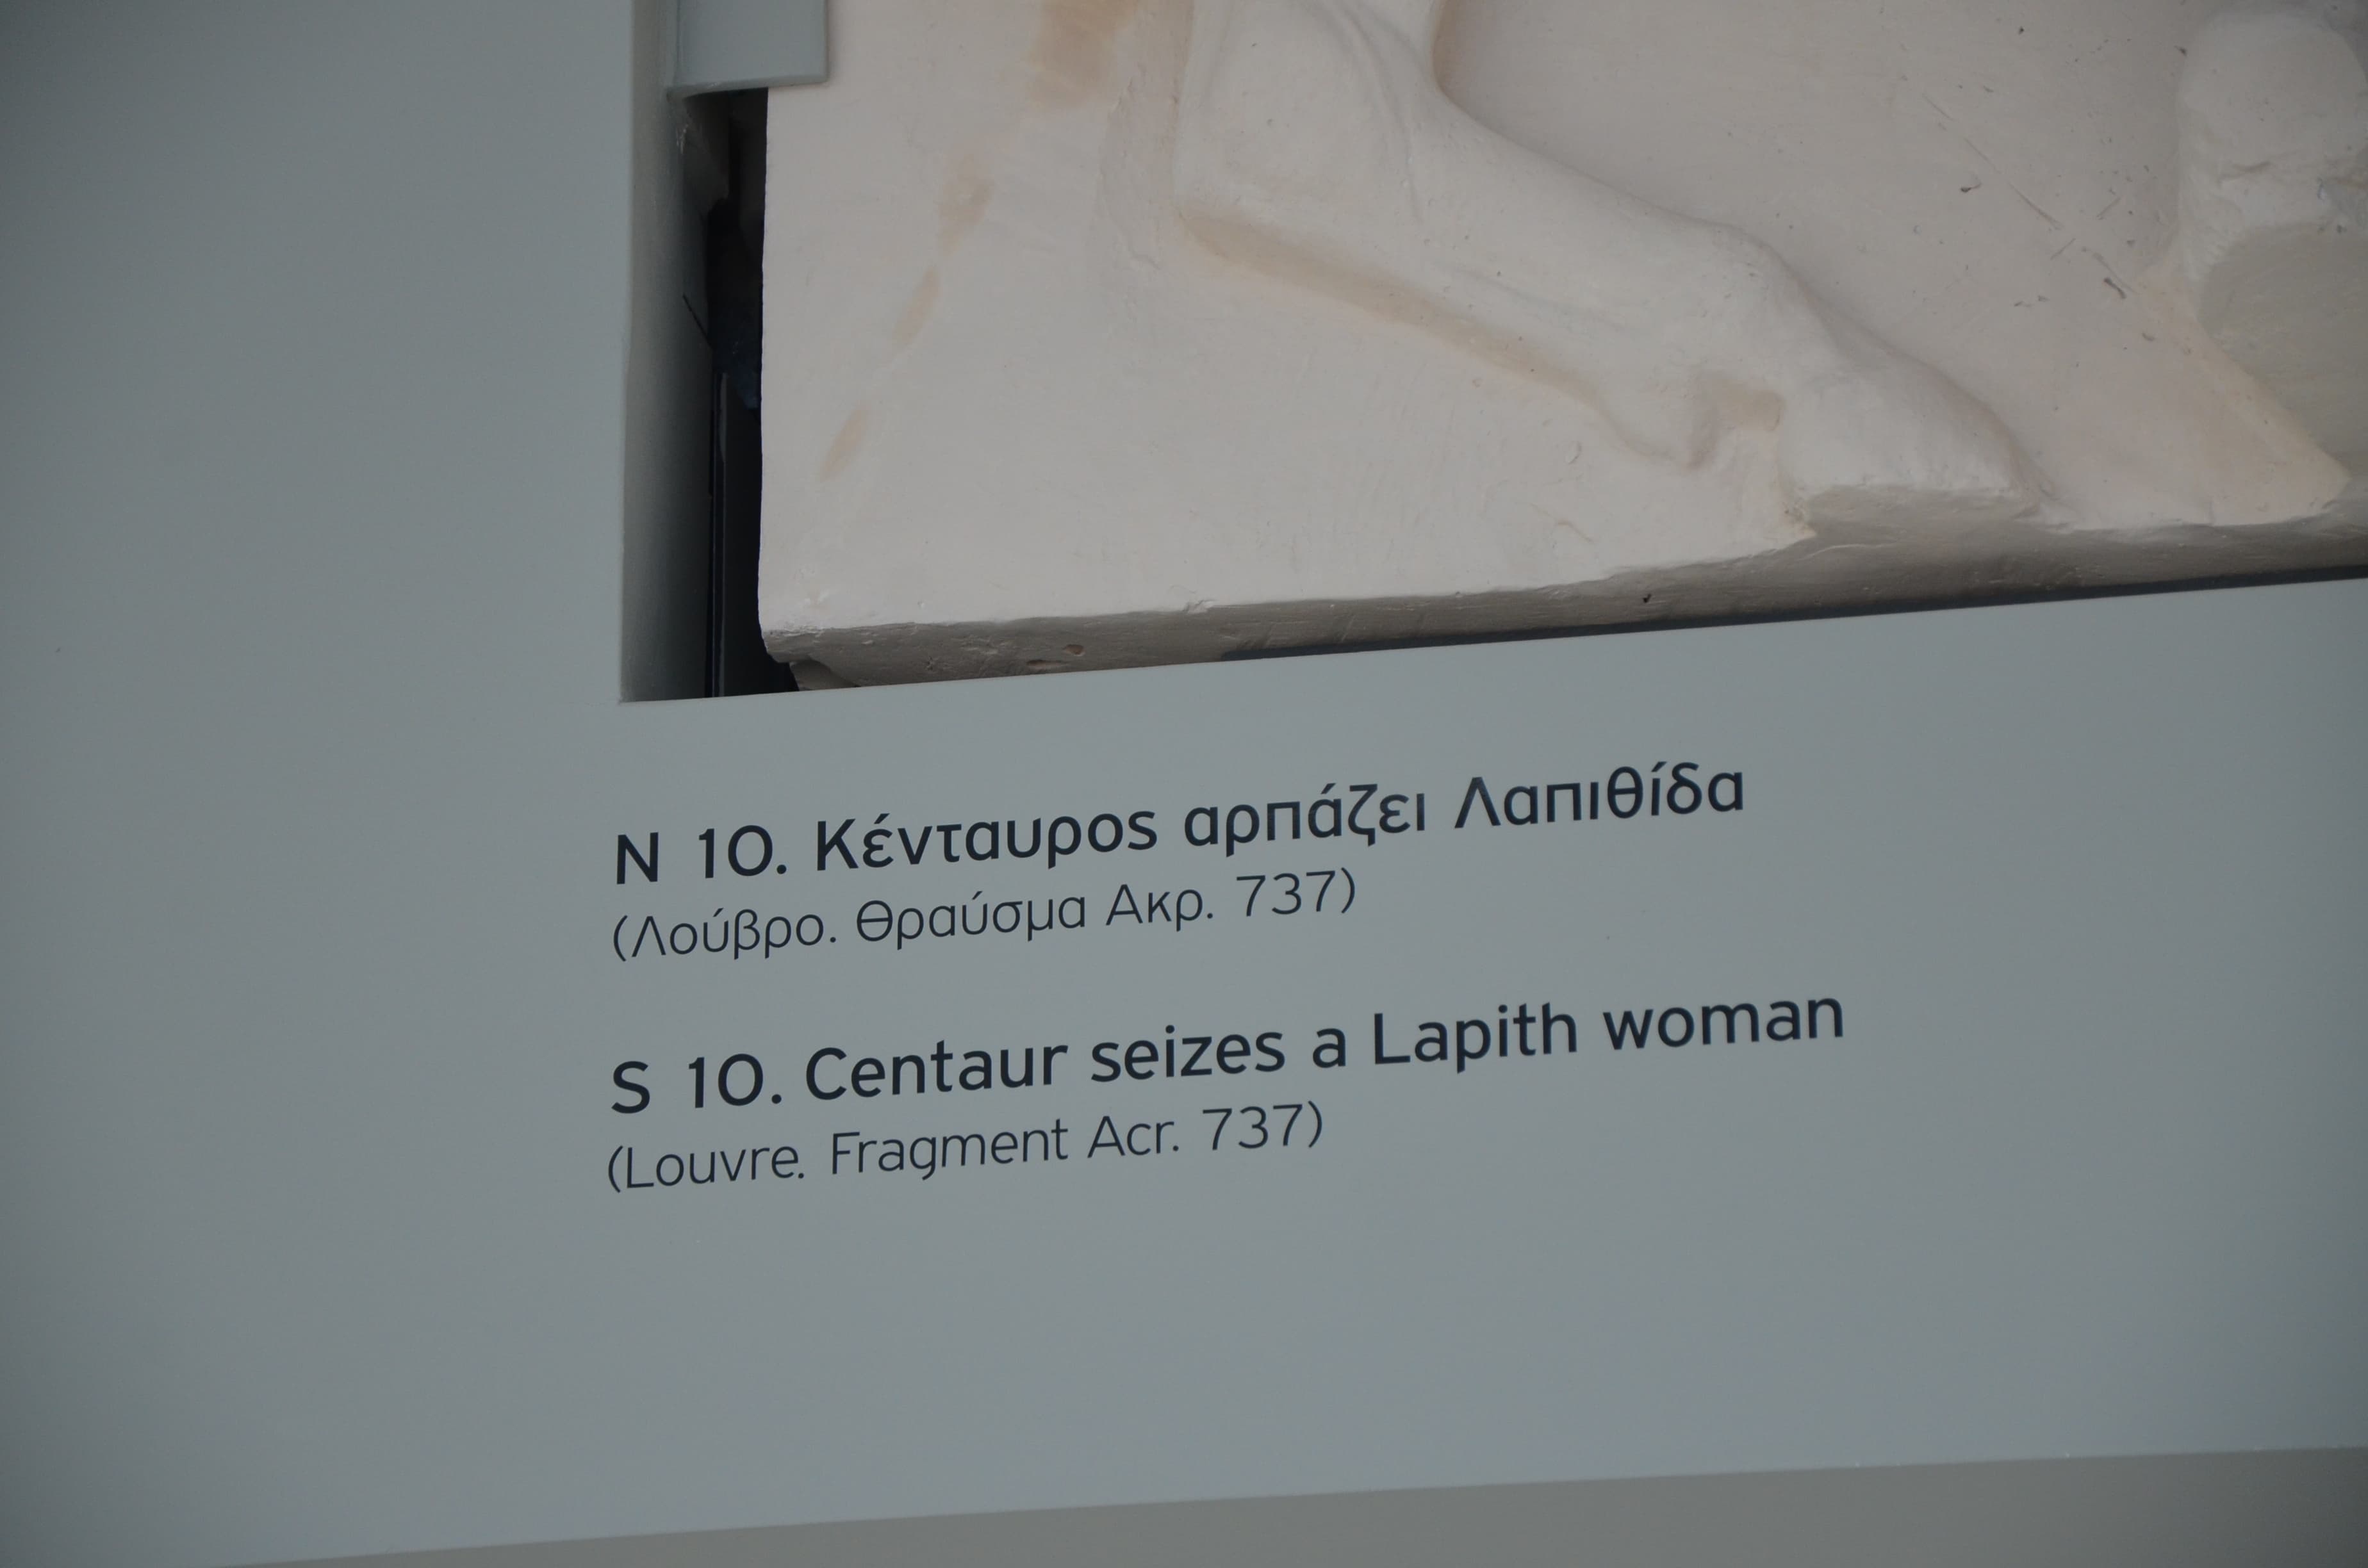 Label of a missing metope at the Acropolis Museum in Athens, Greece